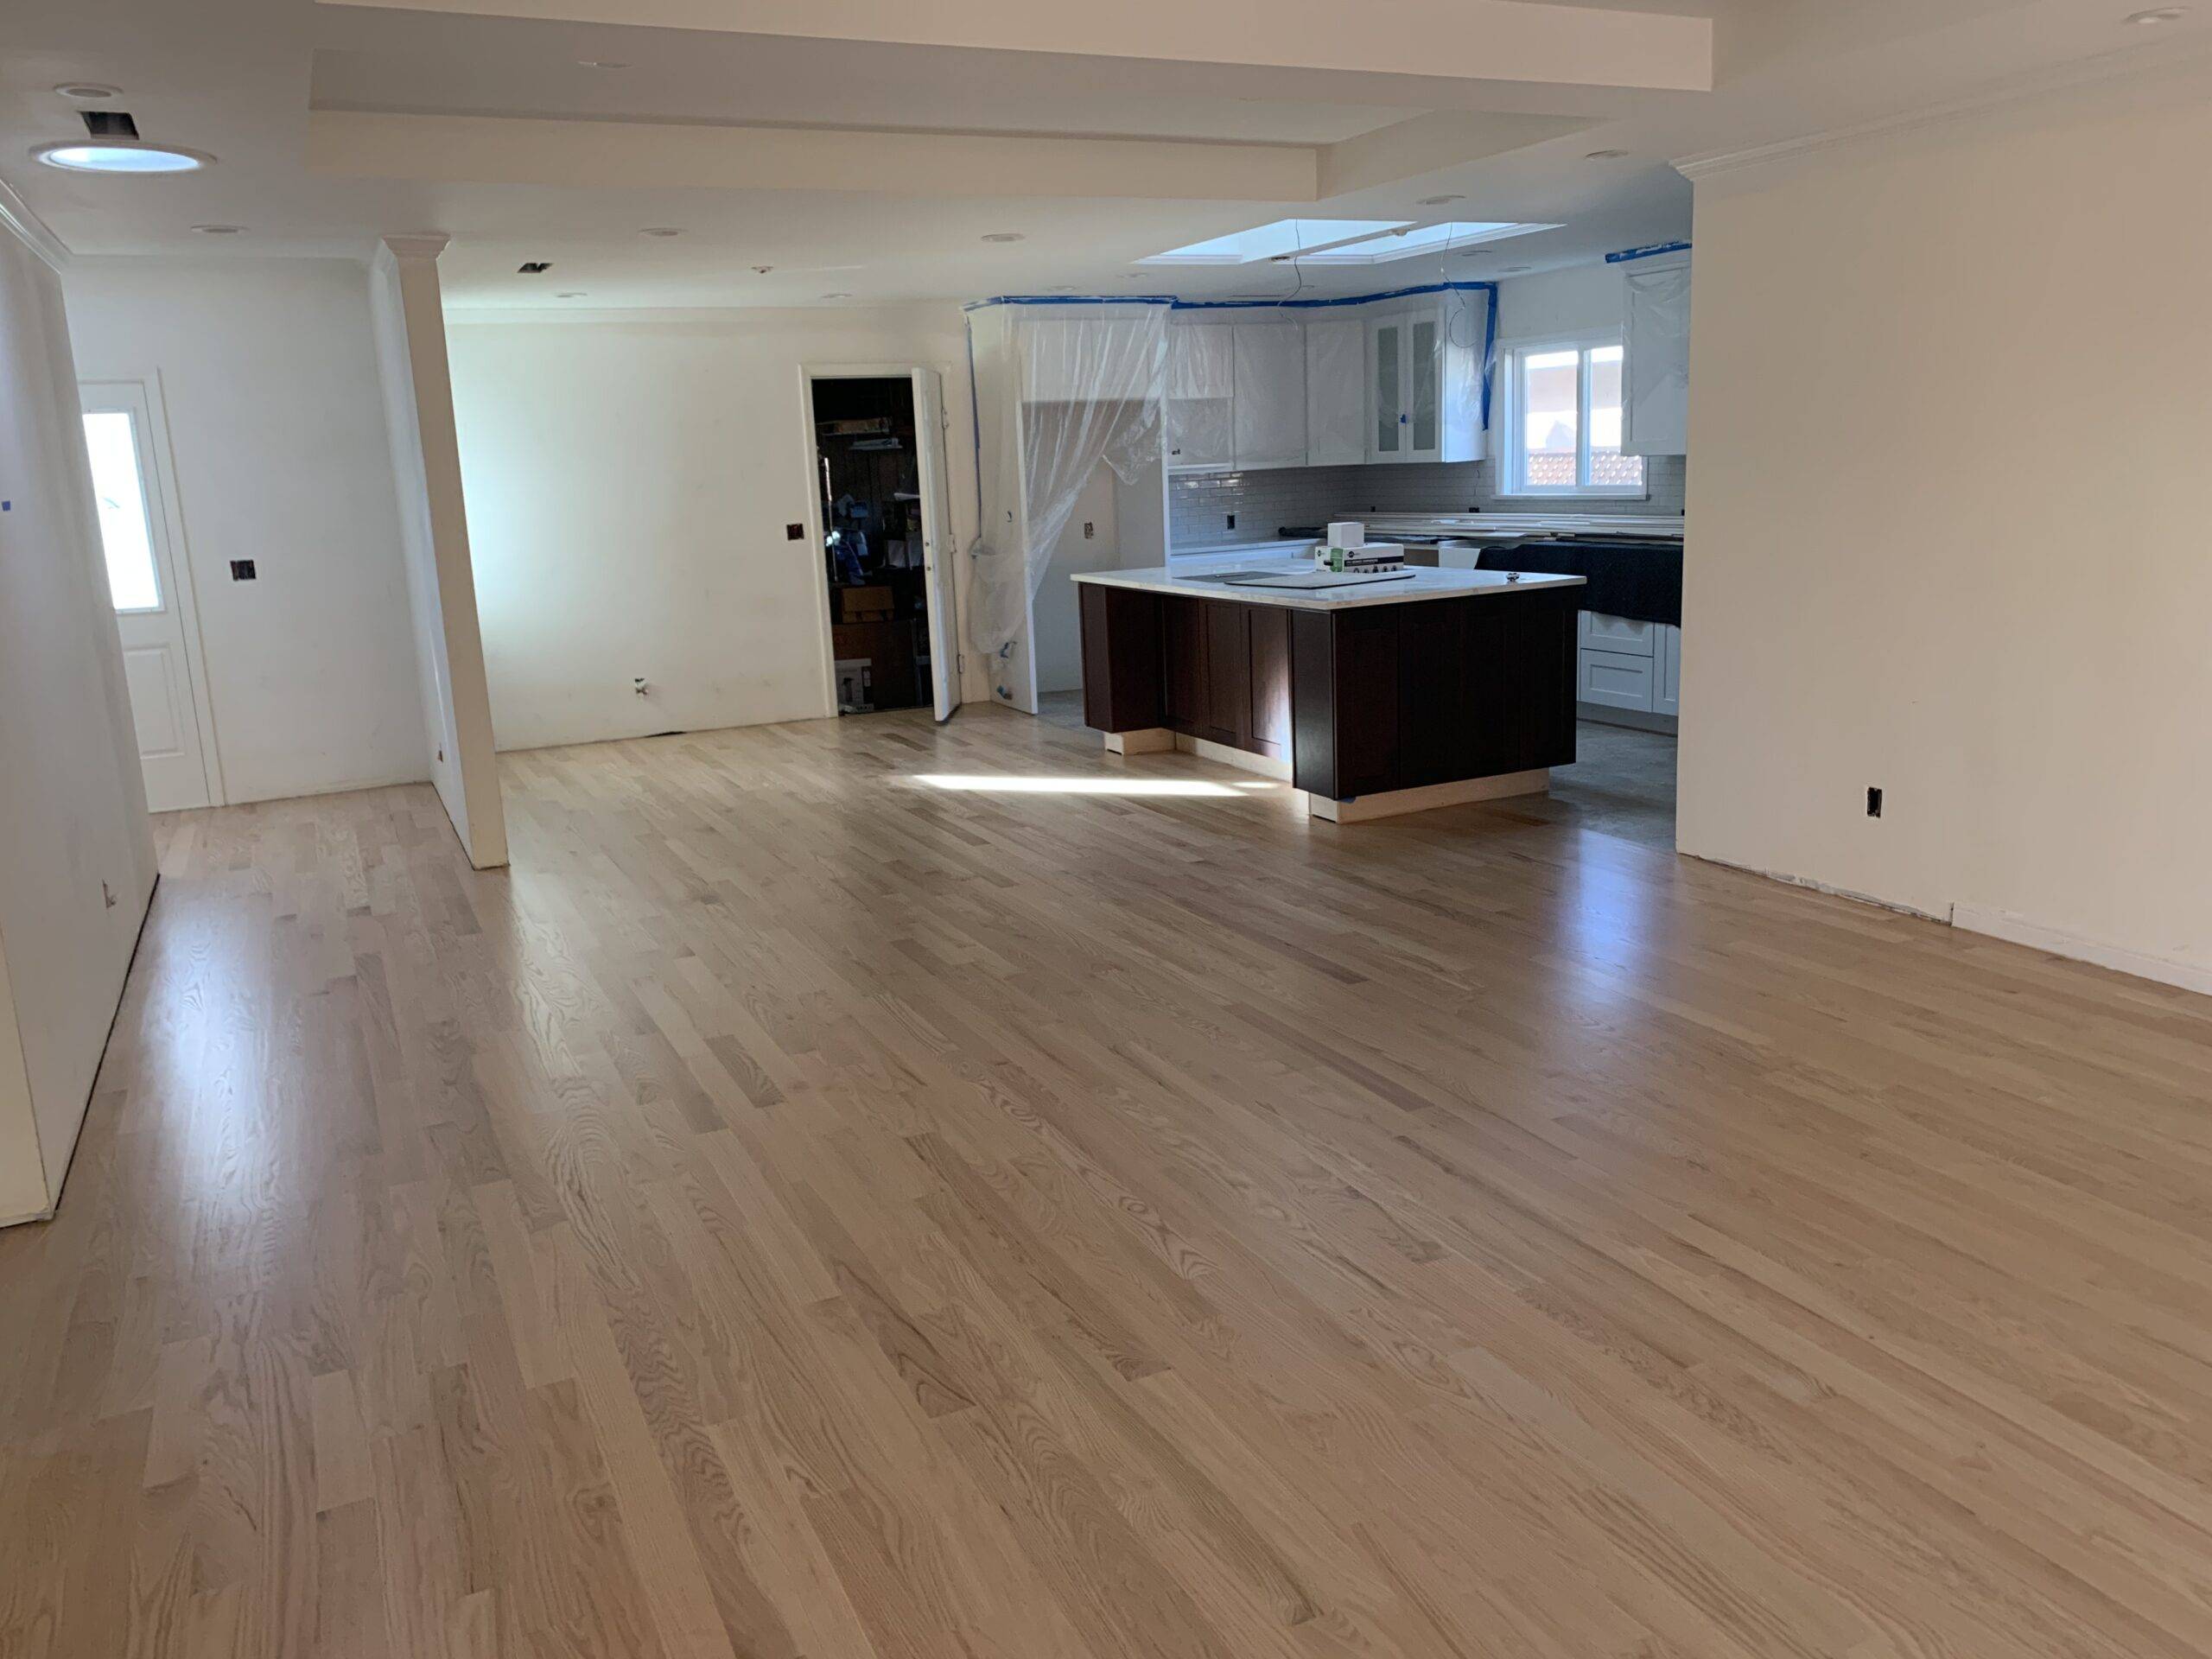 Select Red Oak Finish-in-Place Hardwood Floor in Sunnyvale Home